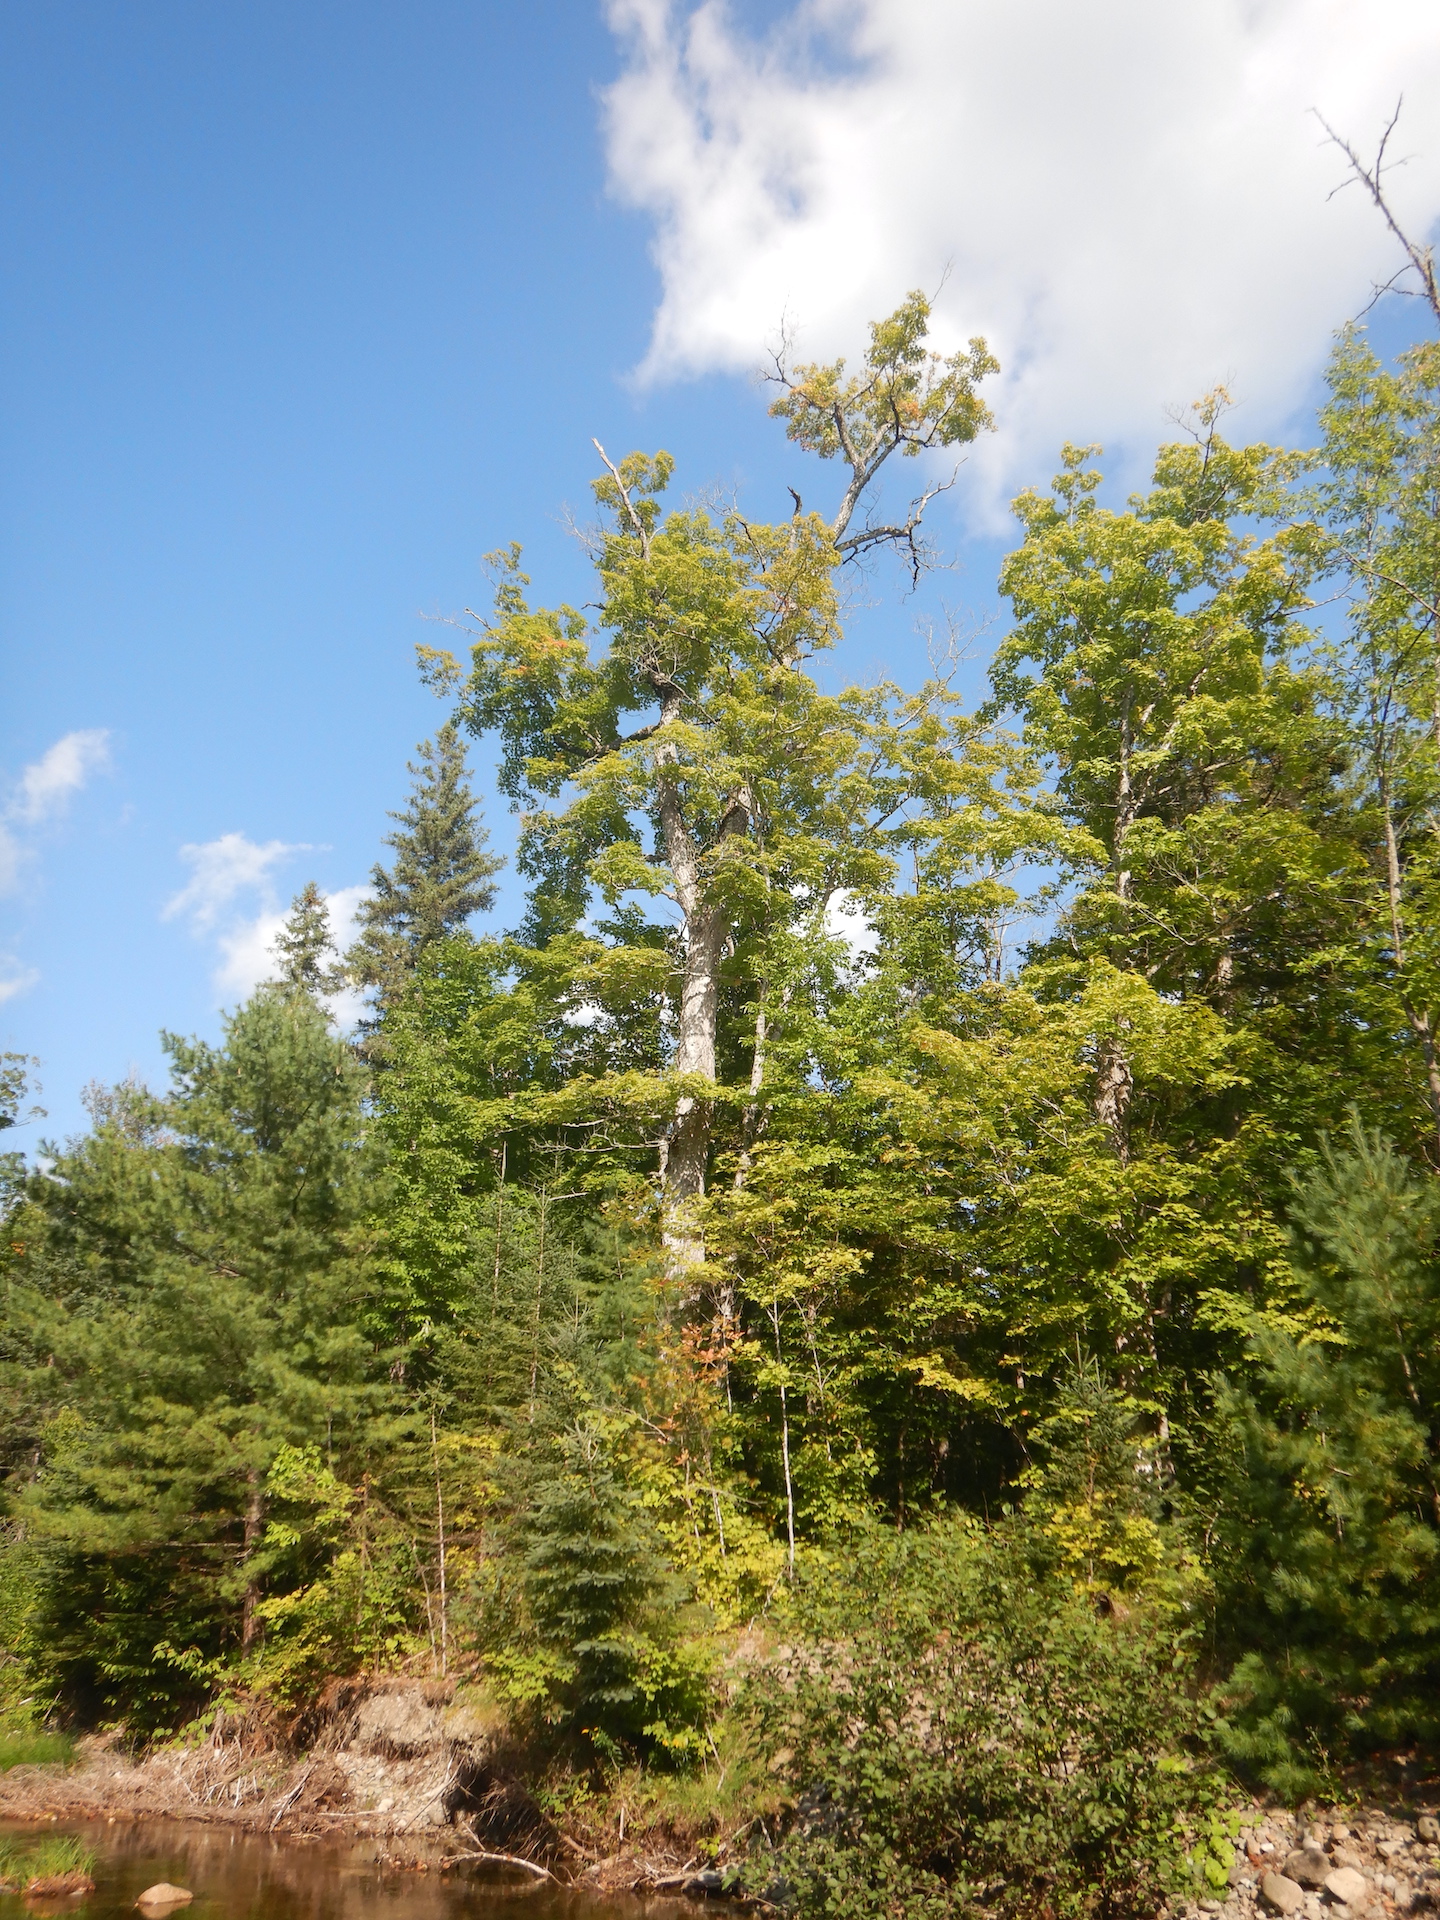 A large sugar maple stands at center of the photo. It is surrounded by other smaller statured trees in a dense forest.